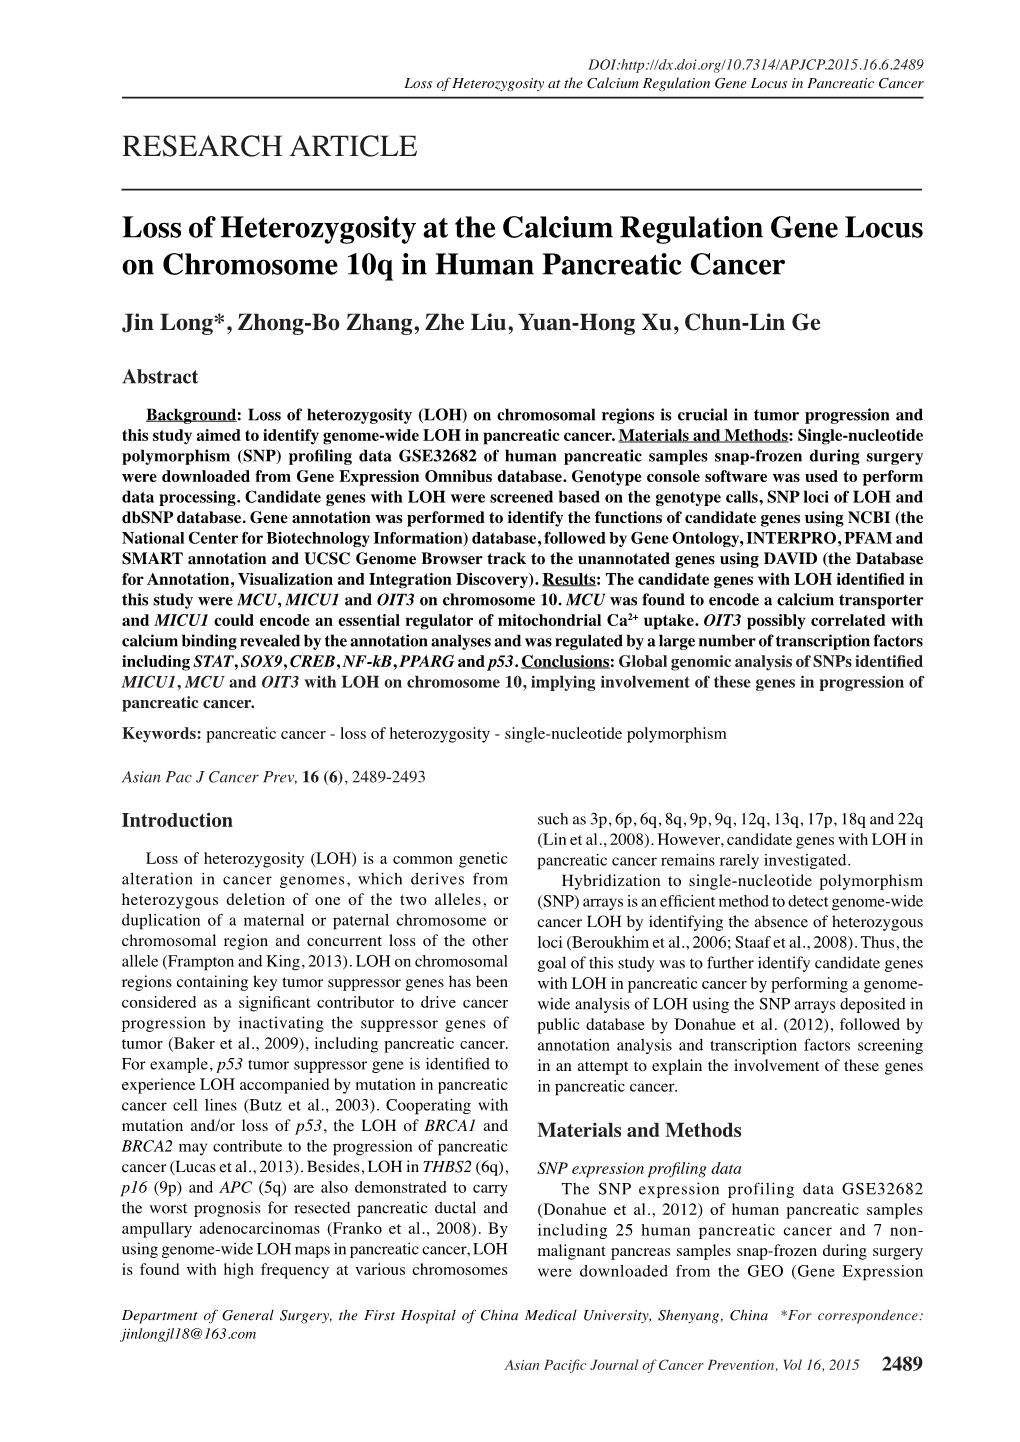 RESEARCH ARTICLE Loss of Heterozygosity at the Calcium Regulation Gene Locus on Chromosome 10Q in Human Pancreatic Cancer